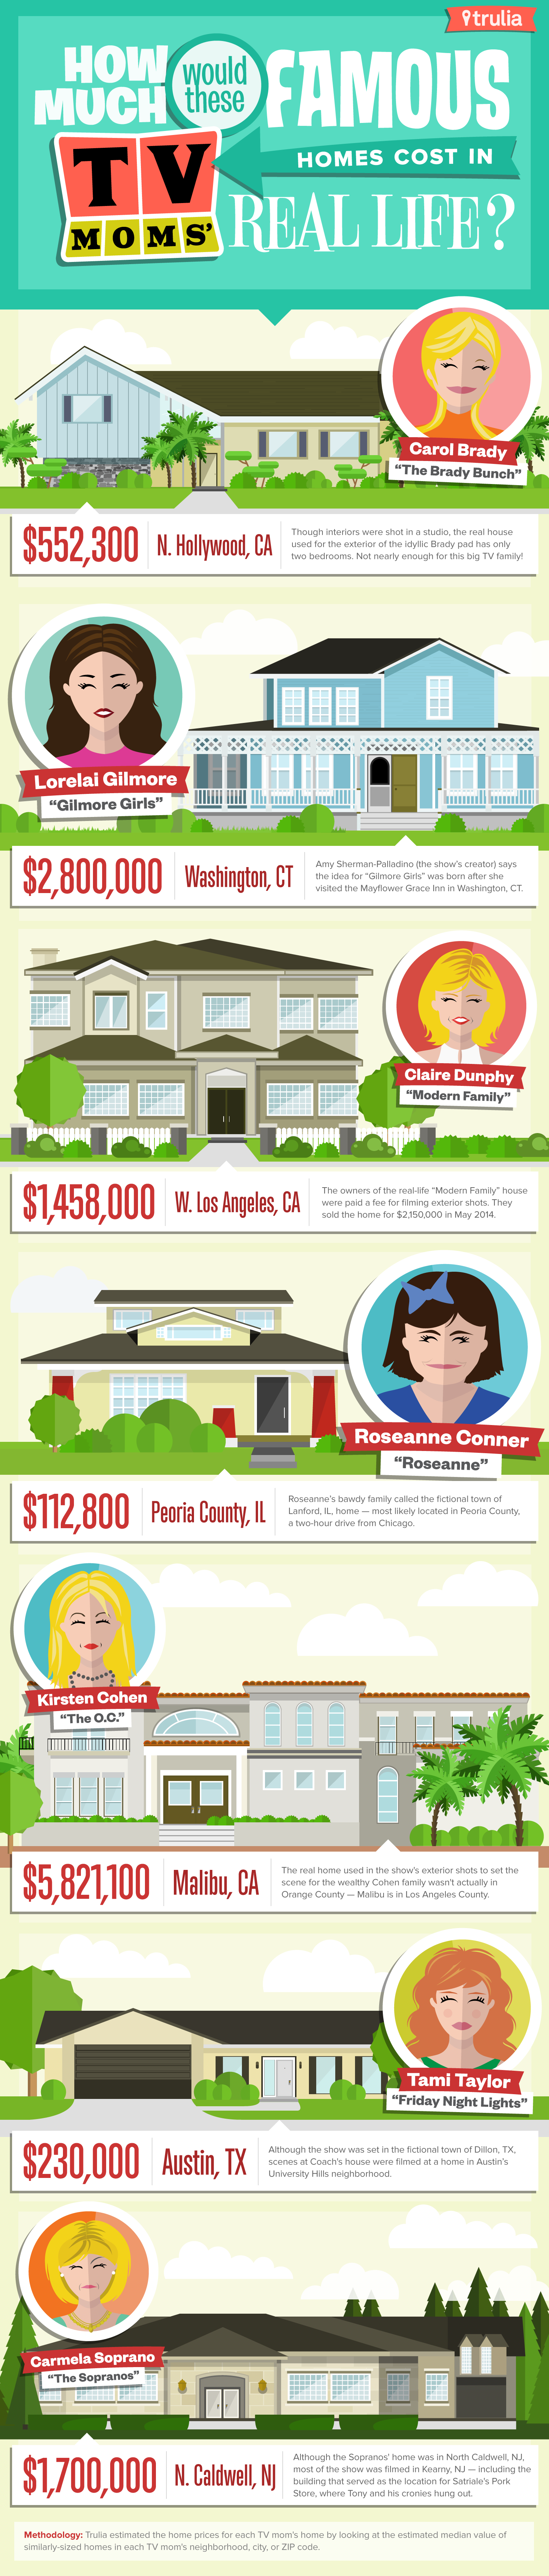 How Much Would These Famous TV Moms’ Homes Cost in Real Life? 